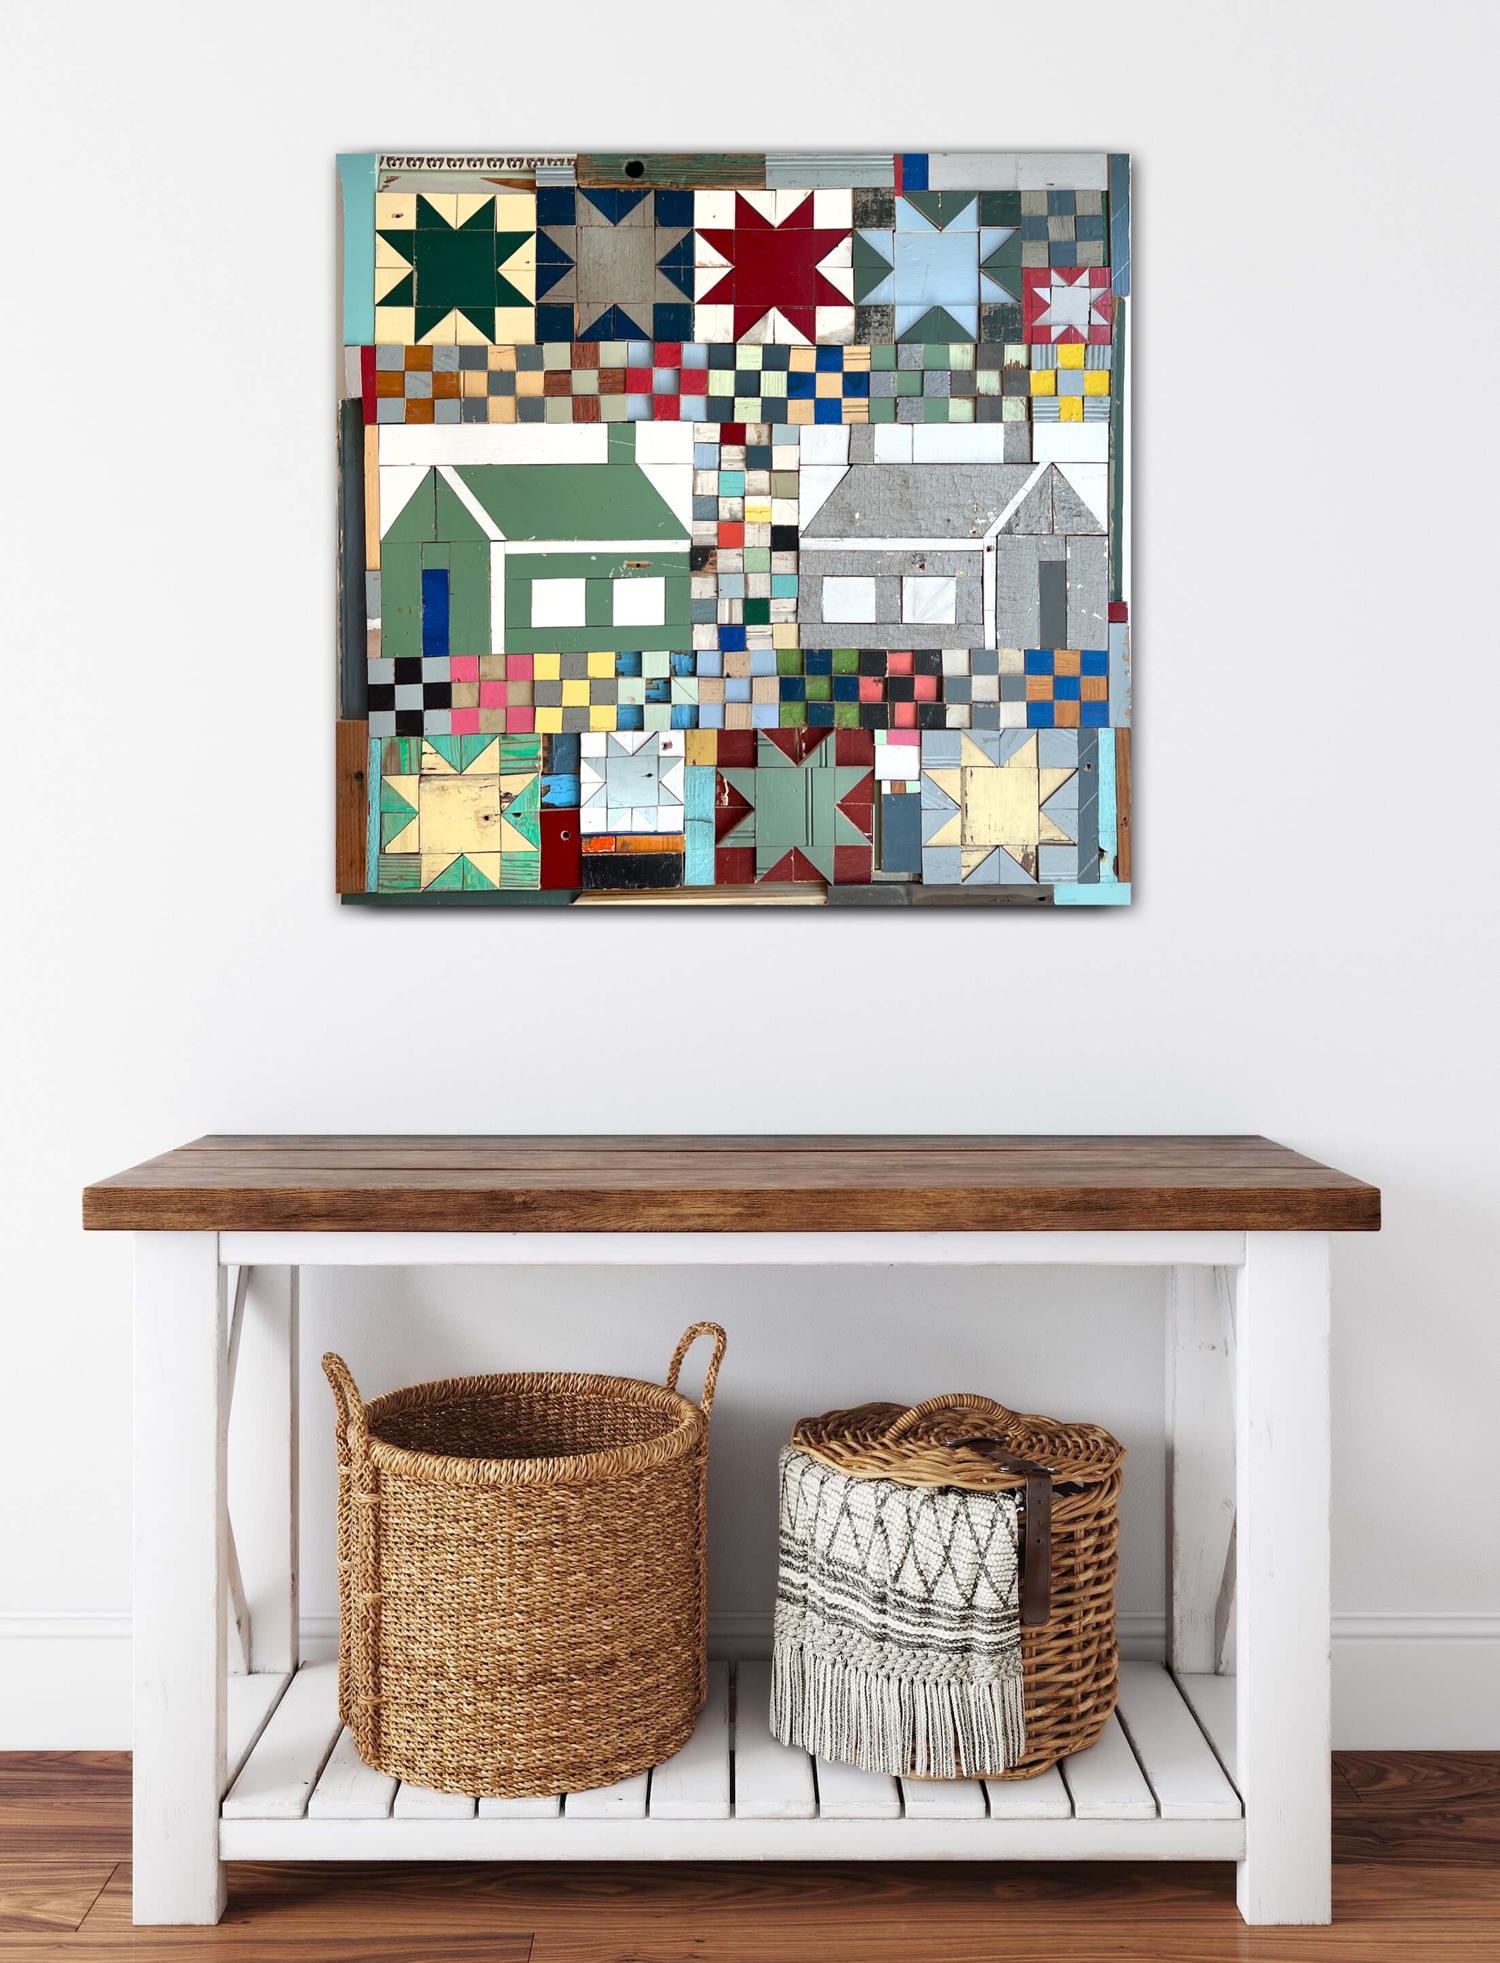 The good Neighbor by Laura Petrovich Cheney Contemporary Geometric Wood Artwork - Abstract Geometric Mixed Media Art by Laura Petrovich-Cheney